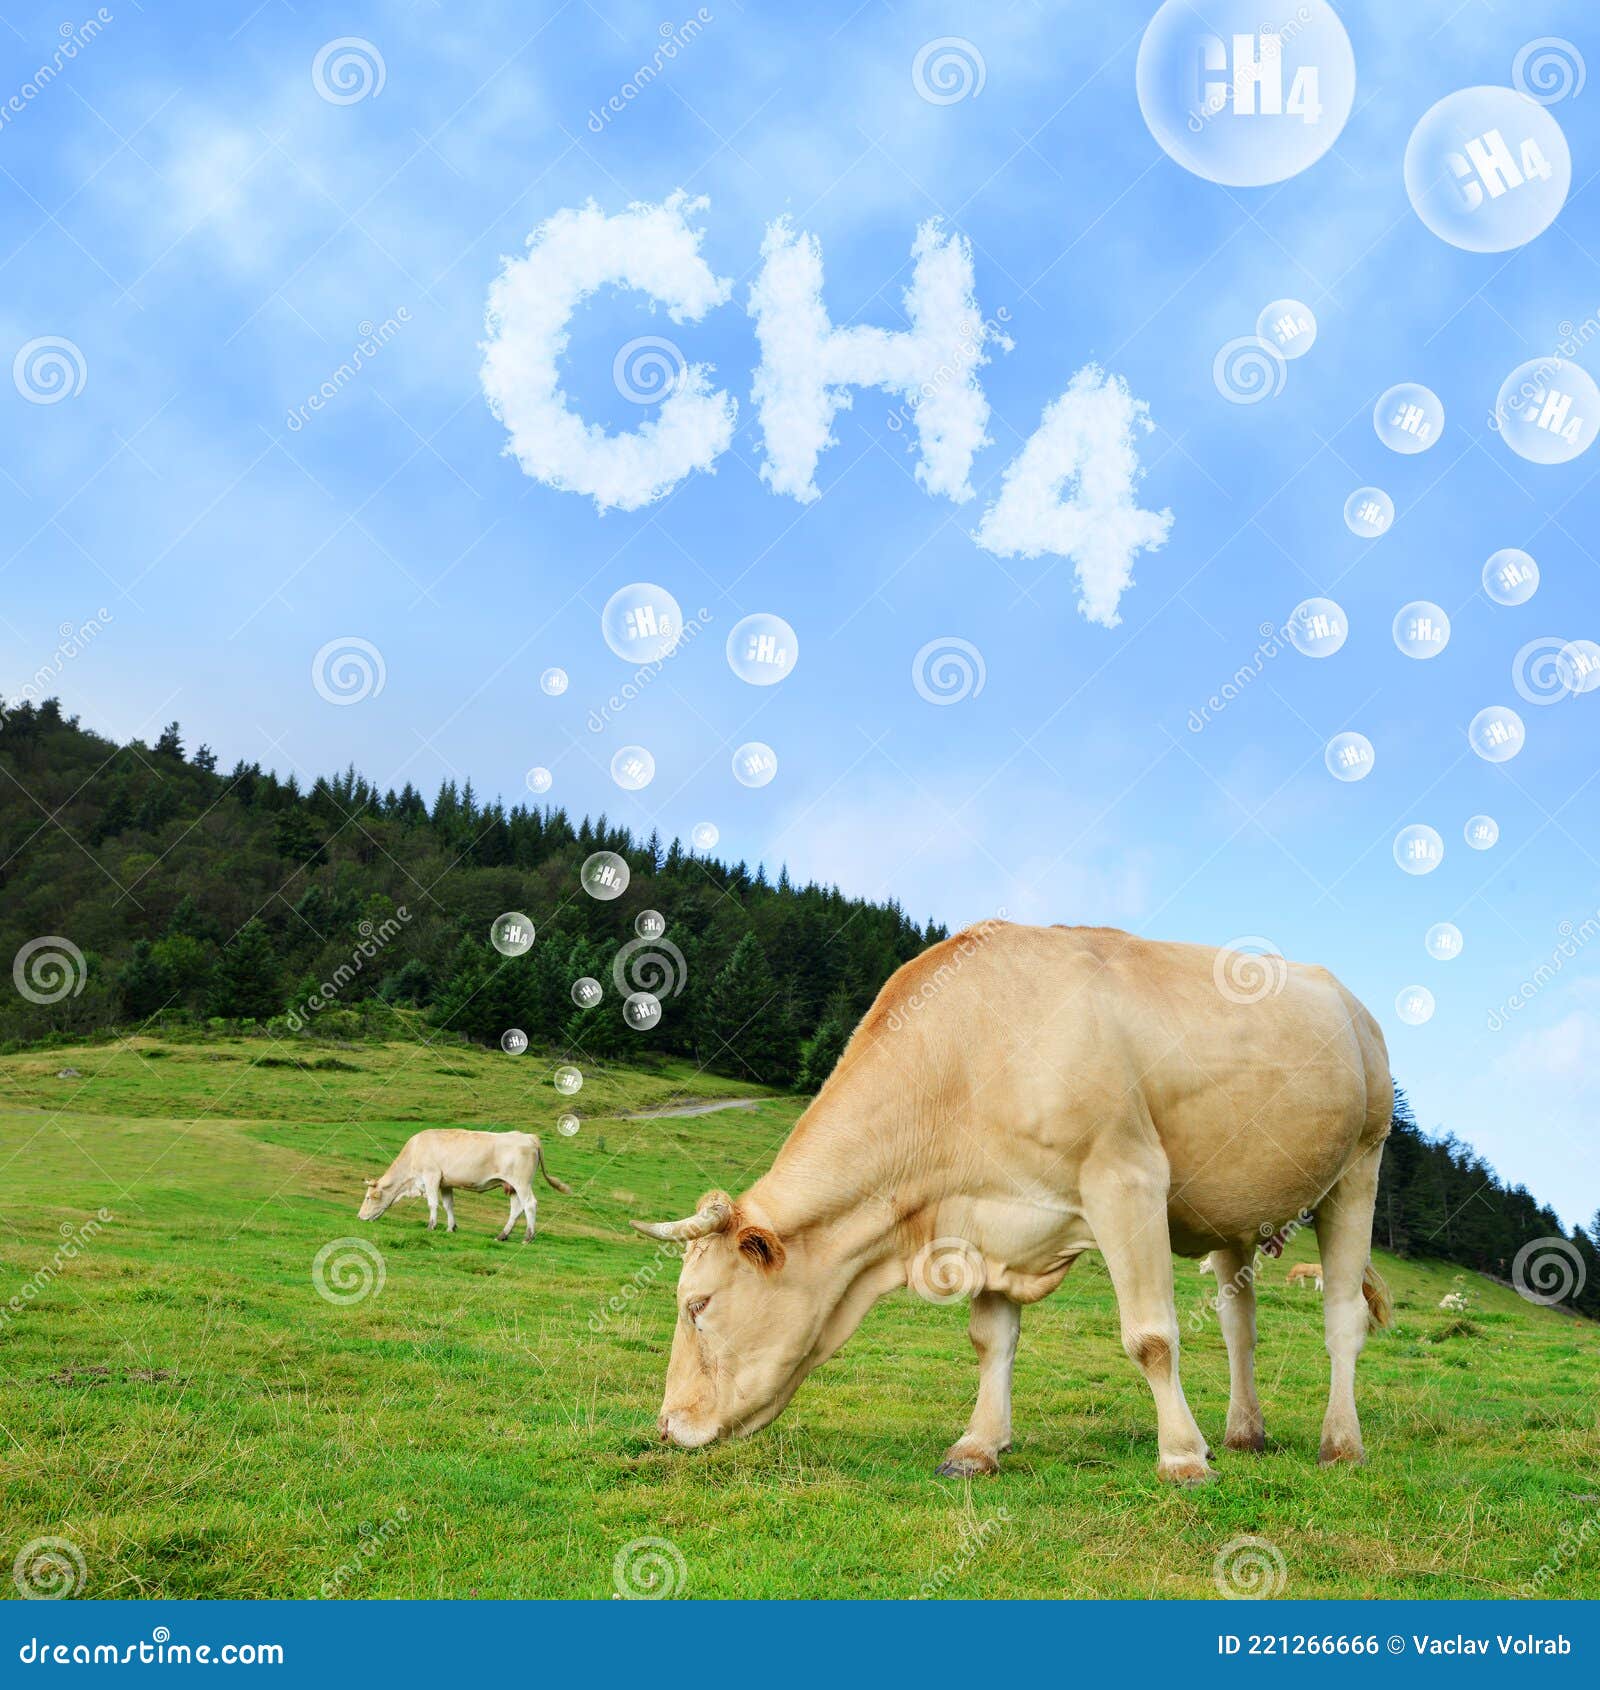 cow grazing on pasture with ch4 text from clouds at the background.